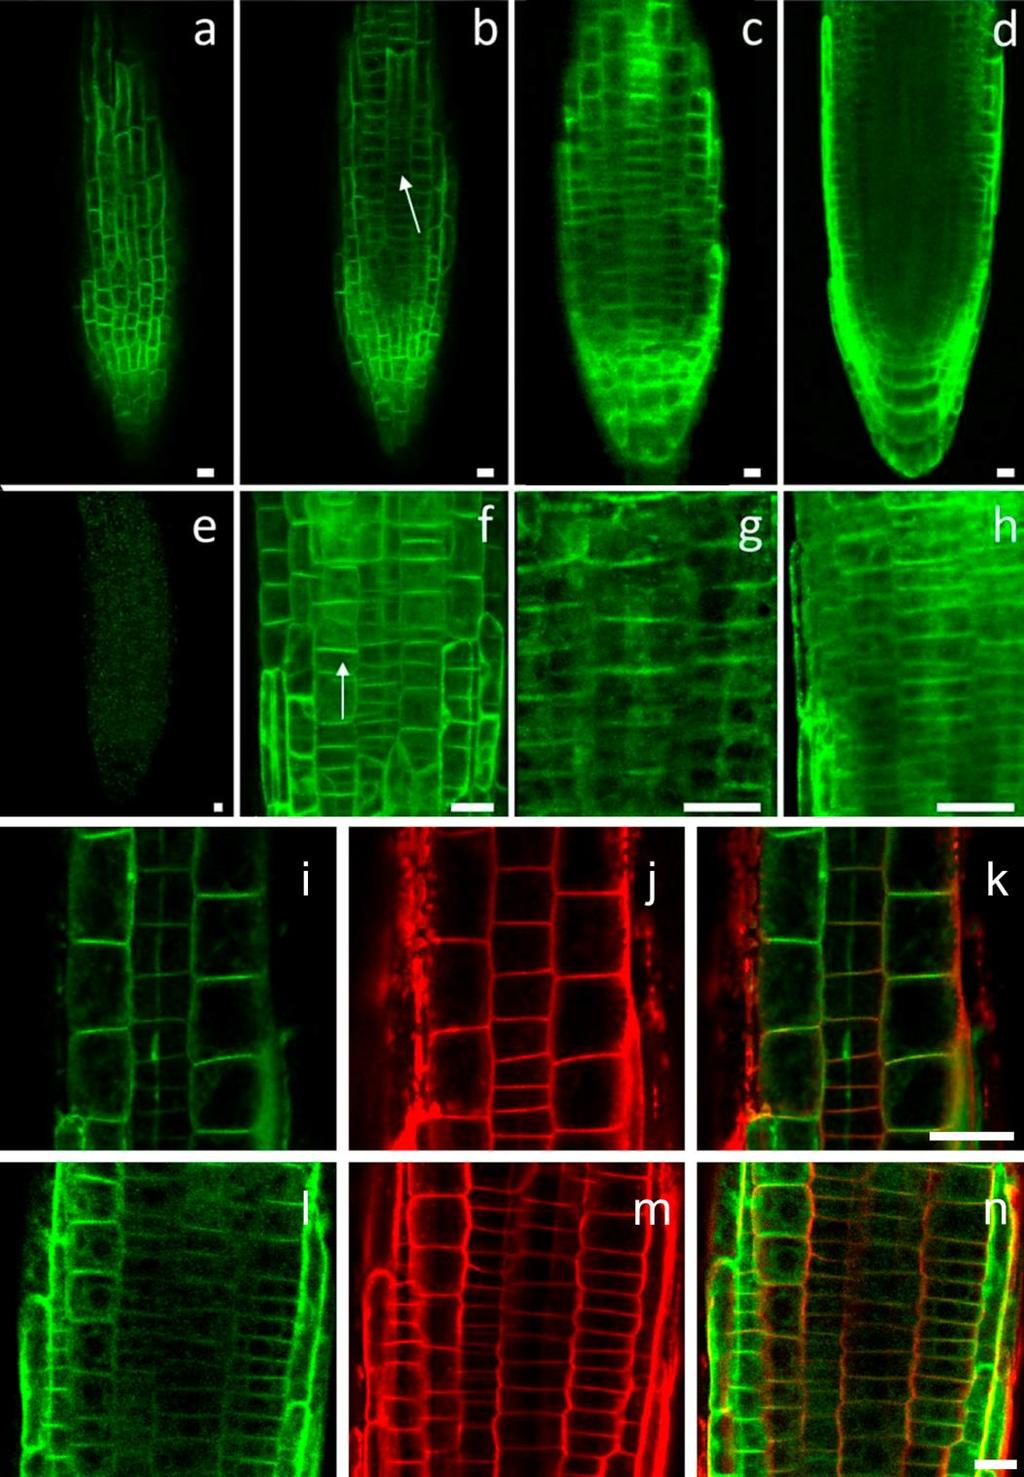 Figure S3. Related to Figure 3 for GFP-PDR1 localization. GFP-PDR1 in Arabidopsis root tips.